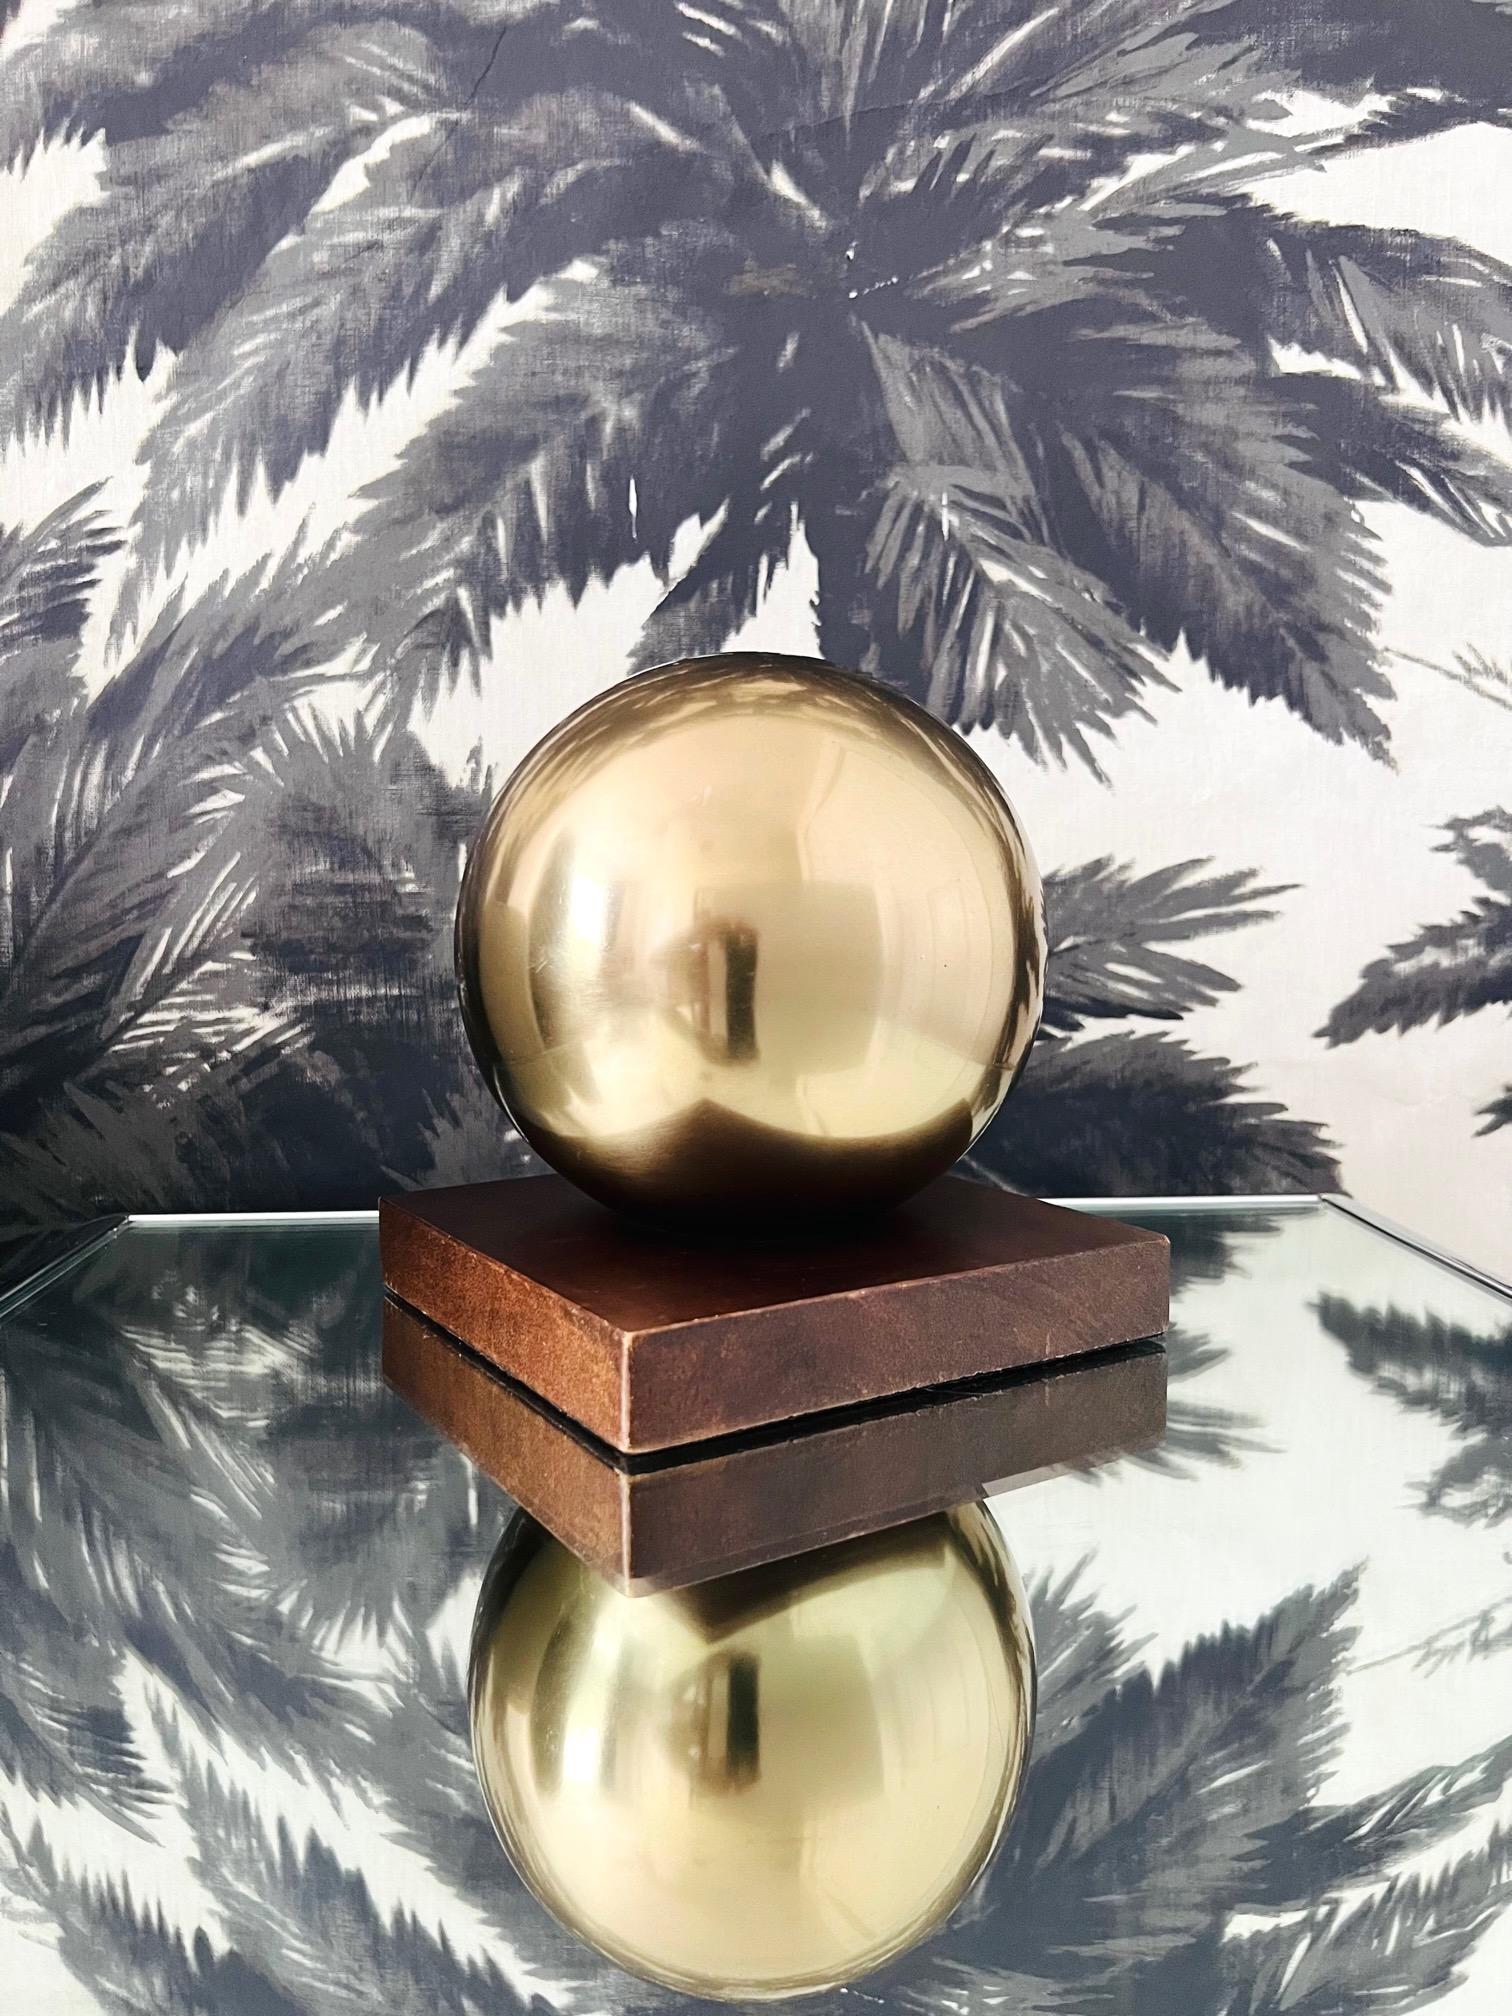 American Mid-Century Modern Architectural Brass Globe Bookend & Decorative Object, 1970s For Sale